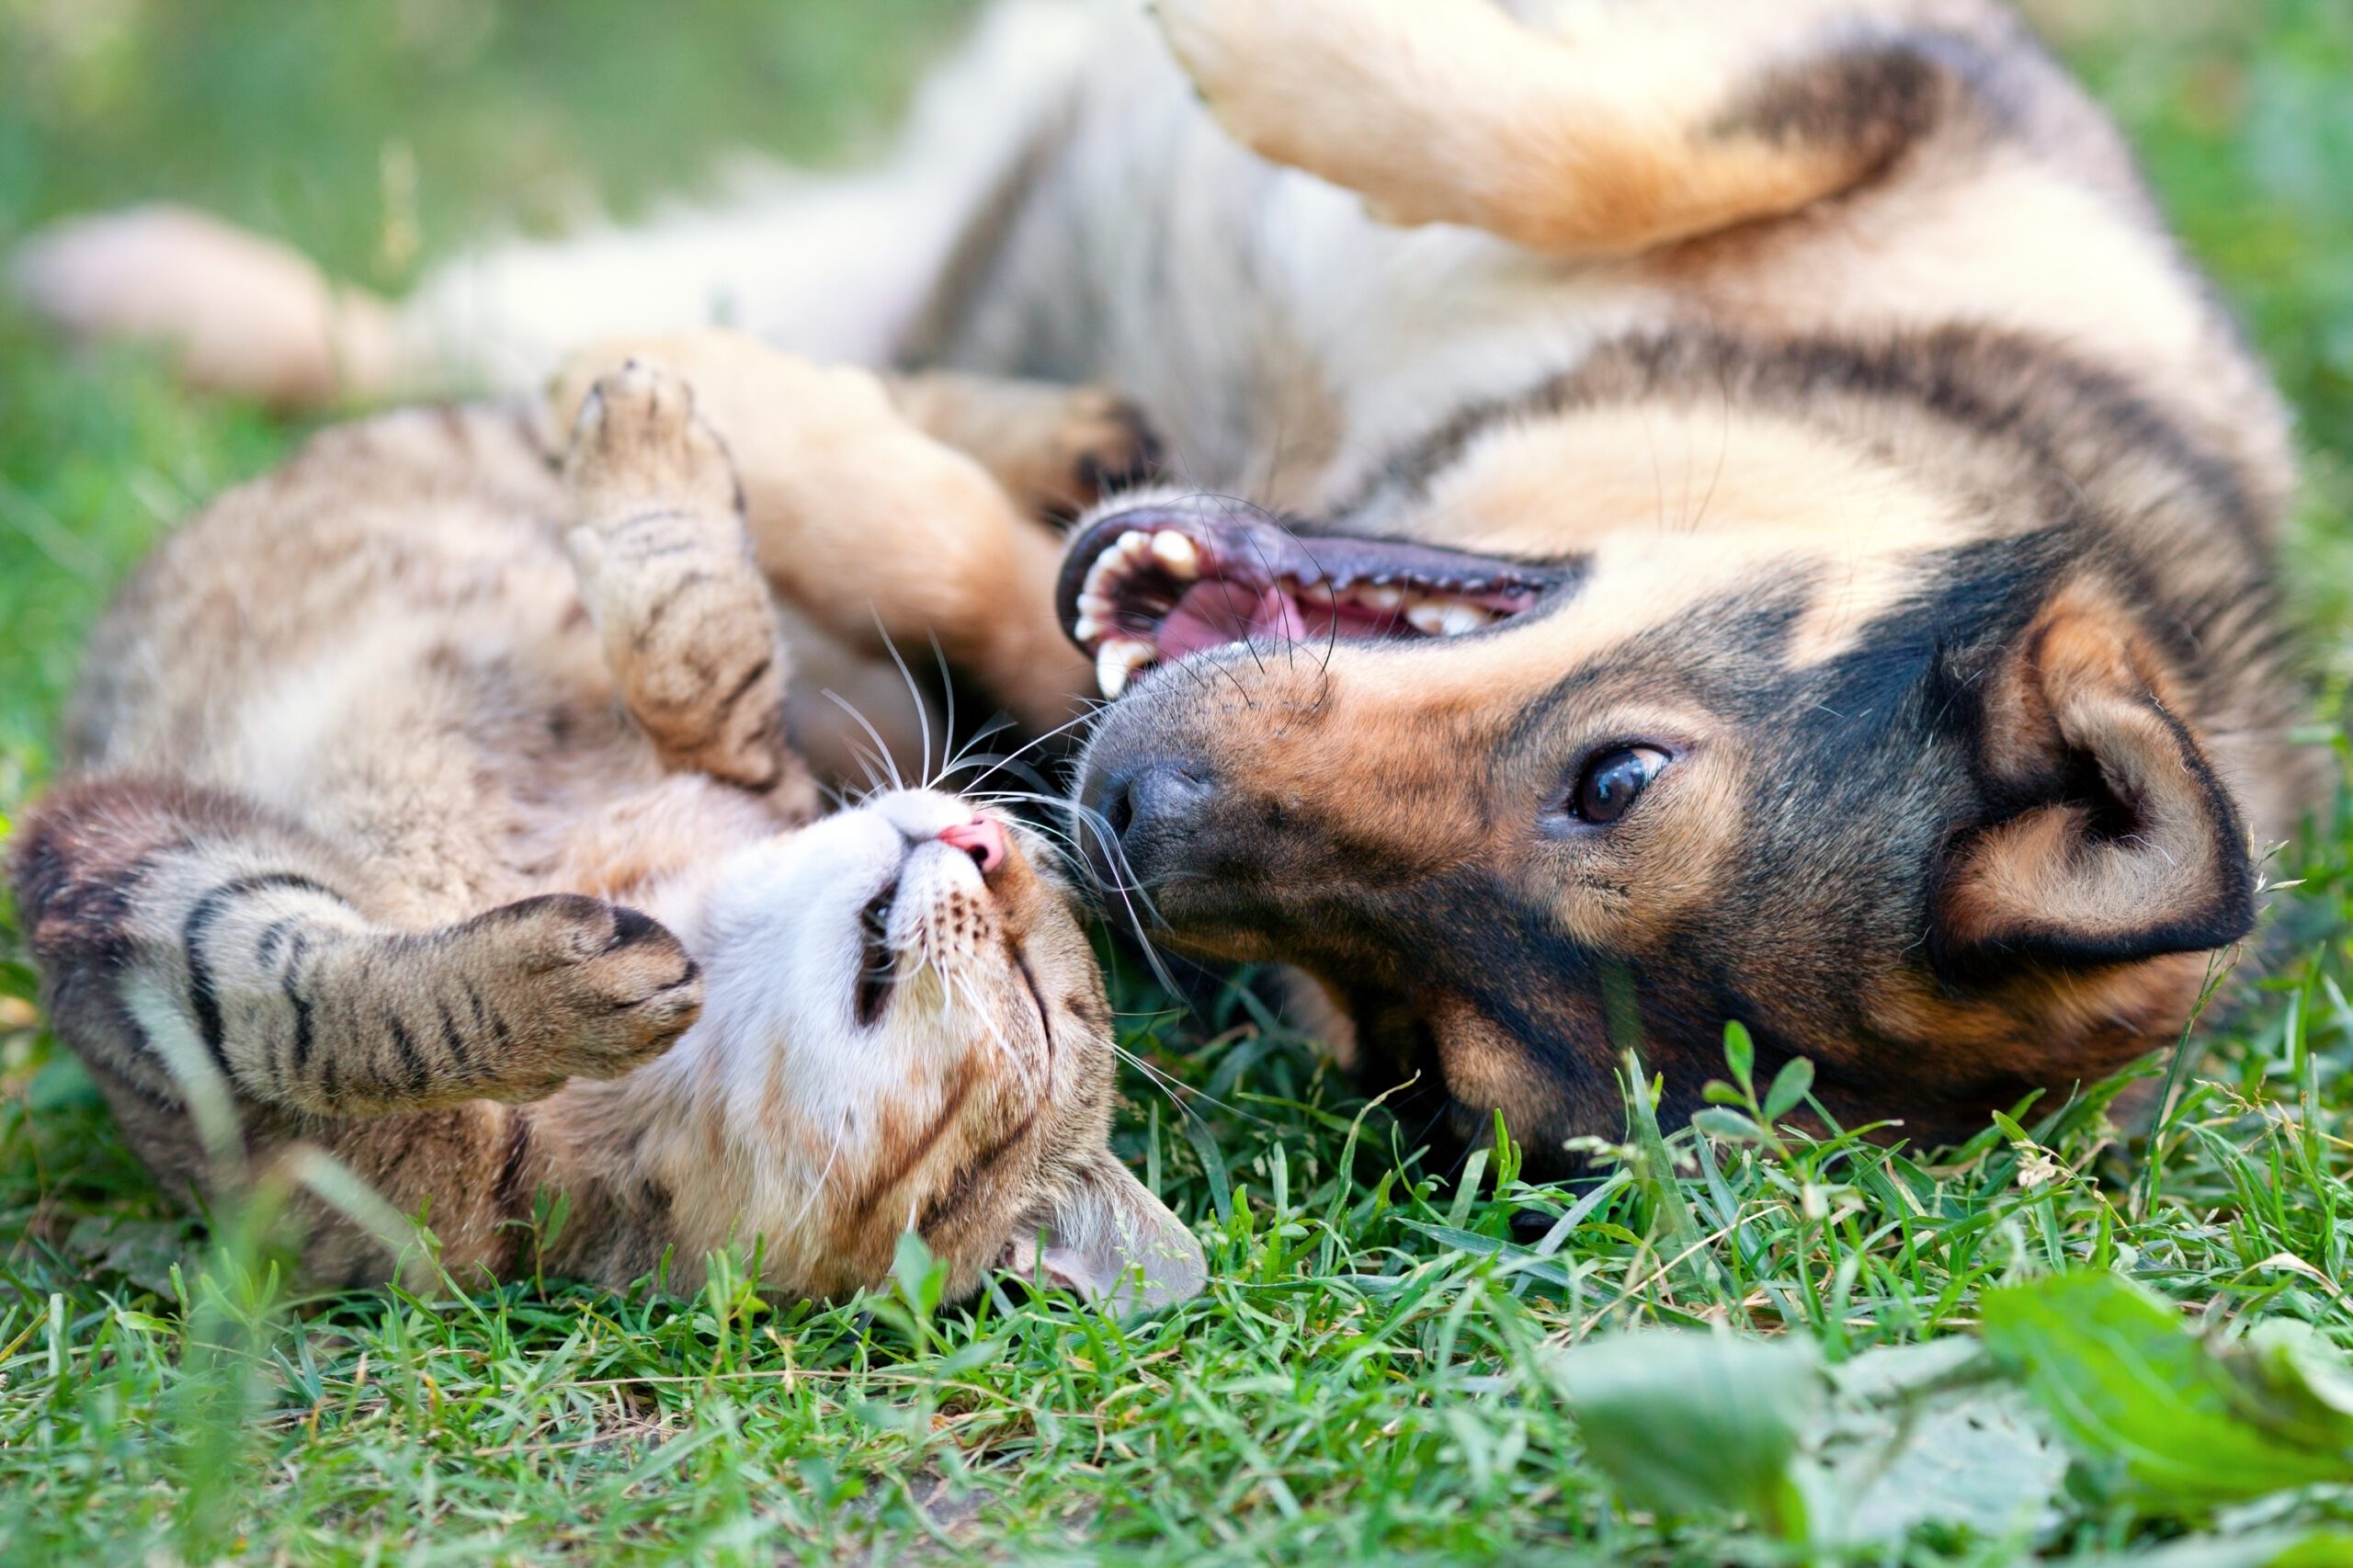 Dog and cat playing together outdoors. Lying on their backs playing together.